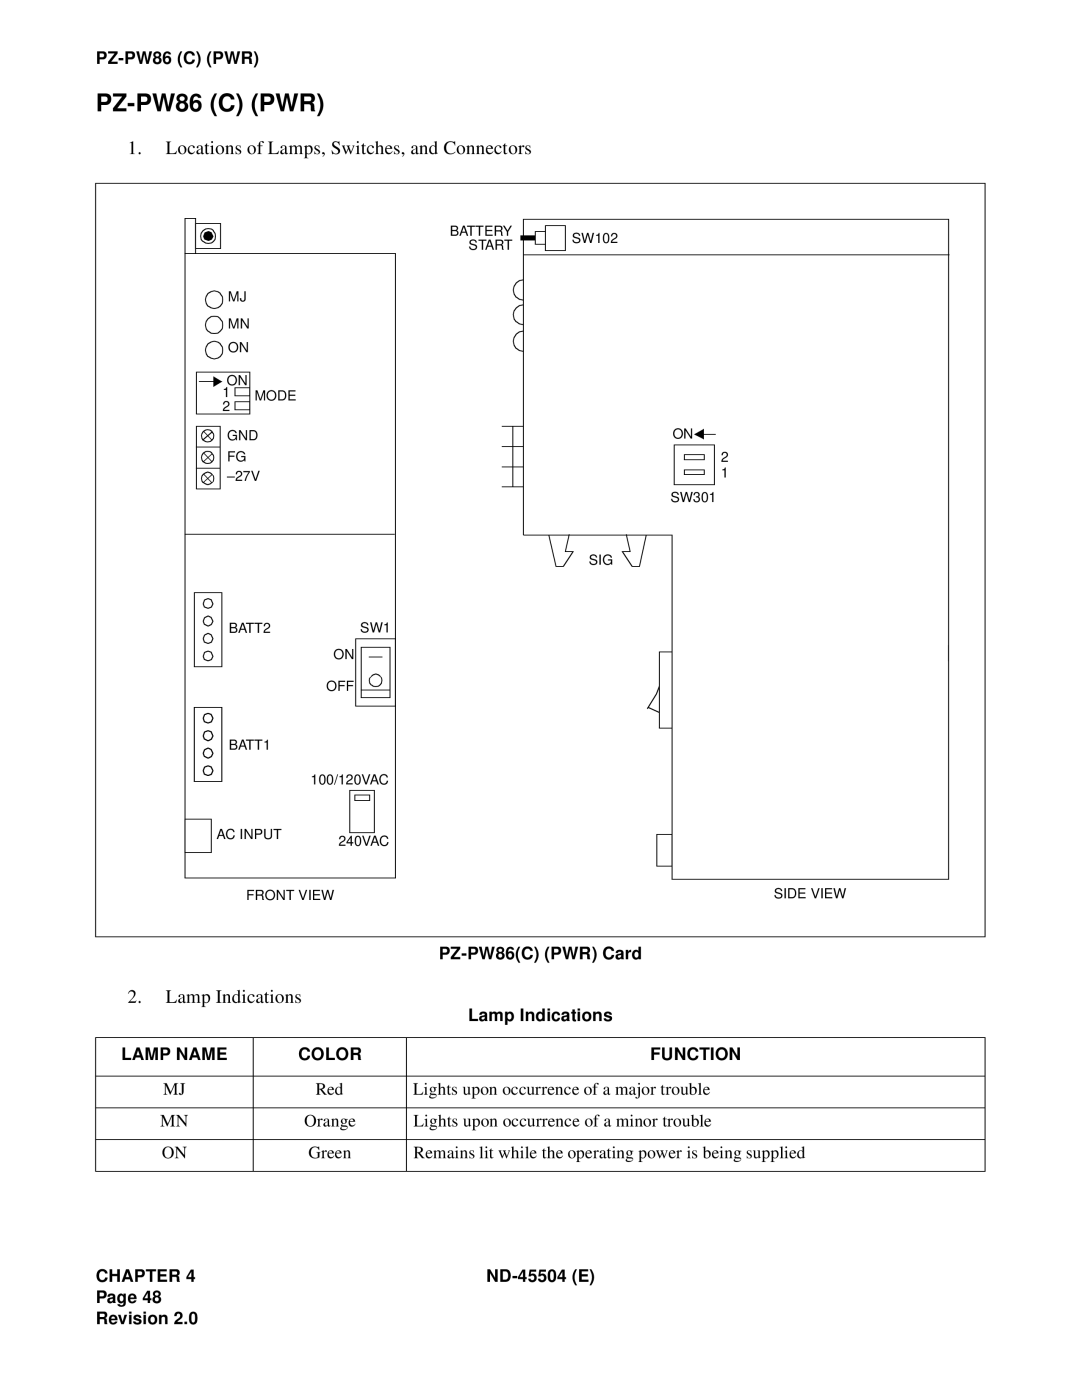 NEC 2000 IVS PZ-PW86C PWR, Locations of Lamps, Switches, and Connectors, Lamp Indications, PZ-PW86CPWR Card, Lamp Name 